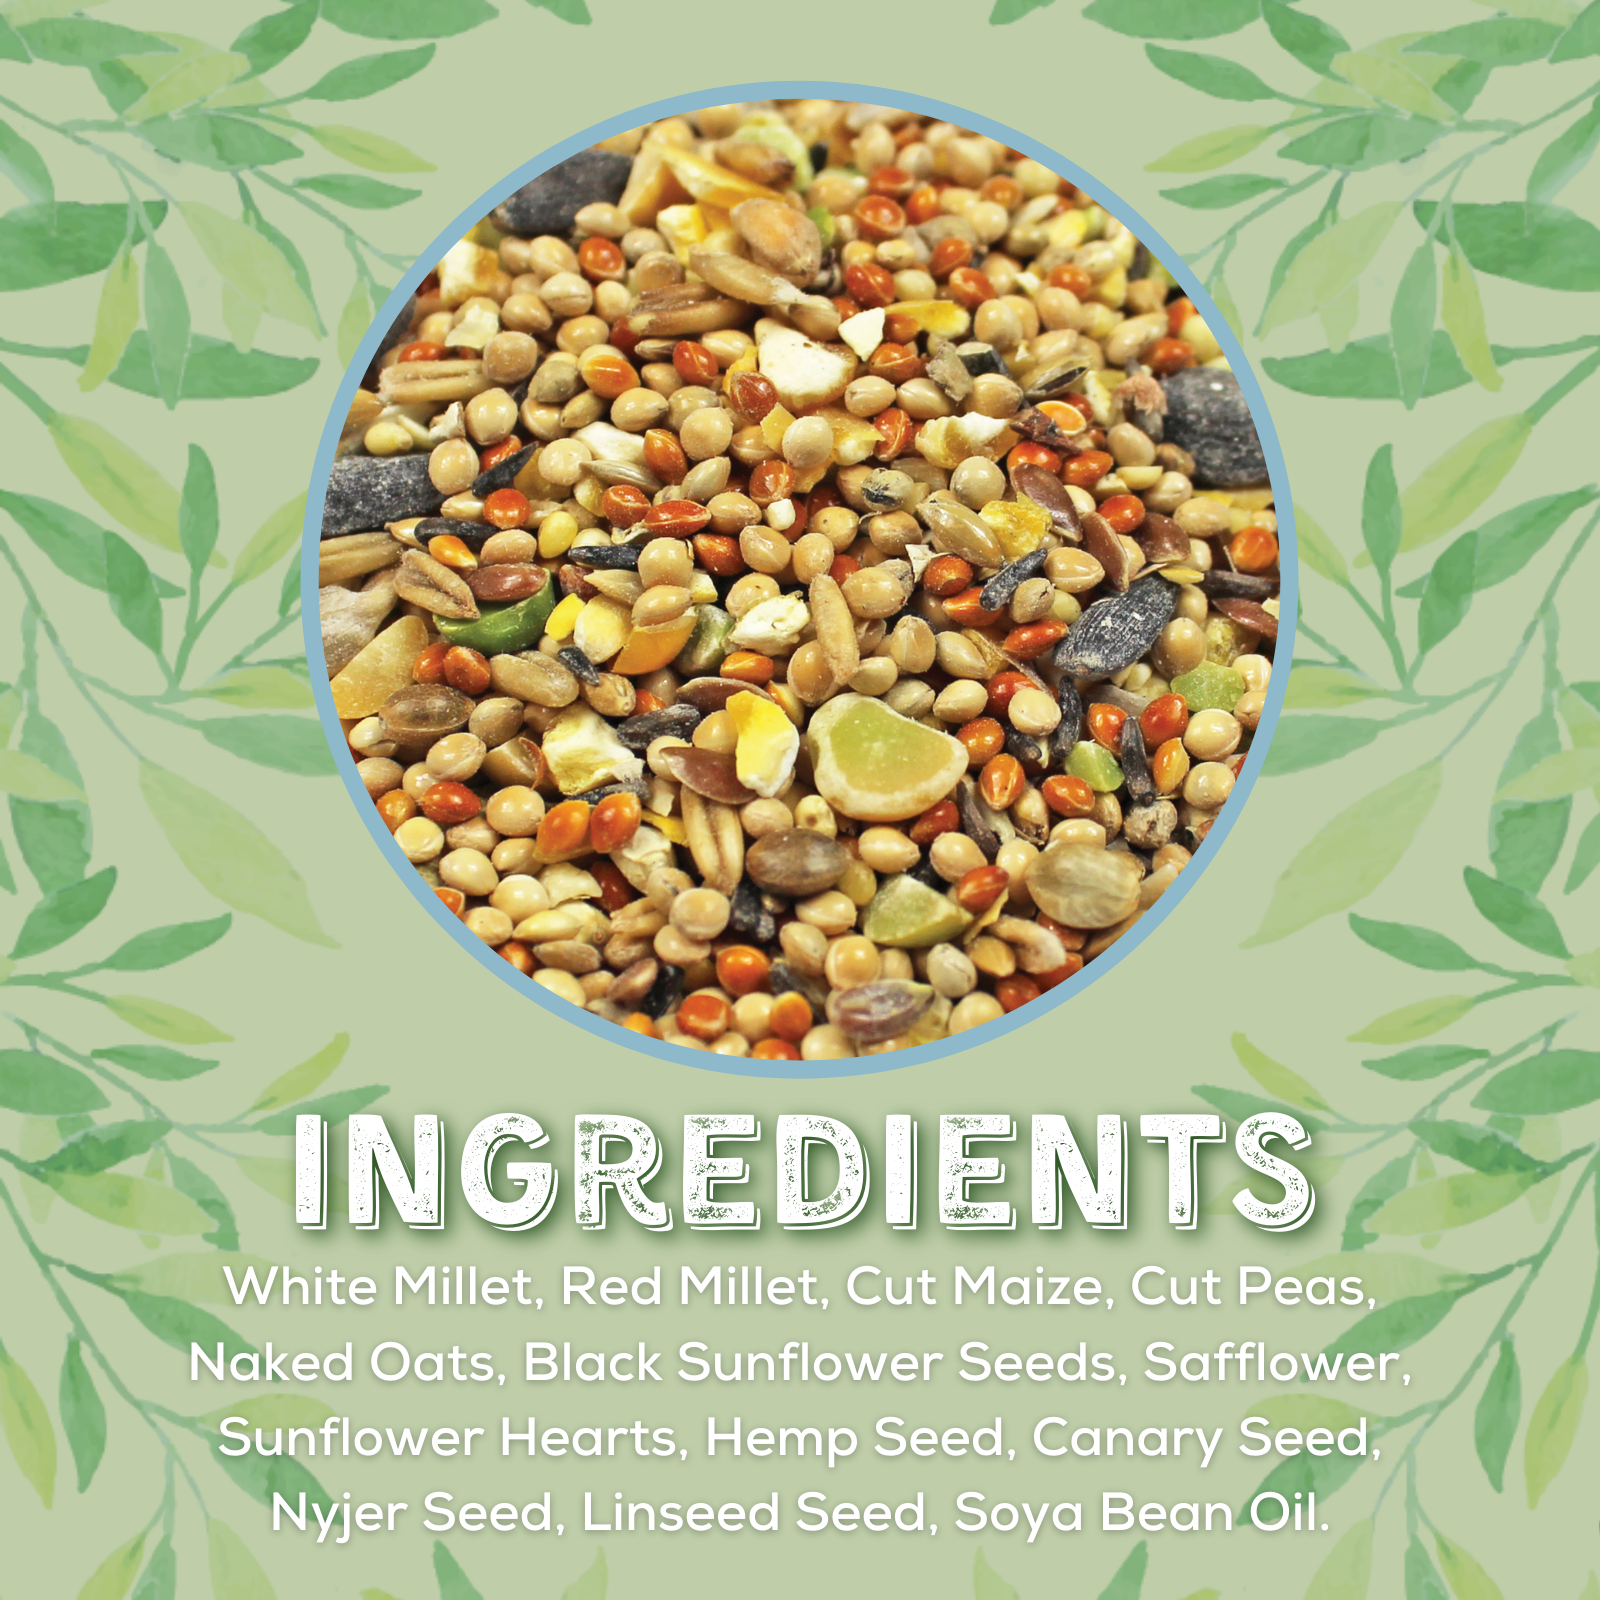 Wheat Free Ingredients - White Millet, Red Millet, Cut Maize, Cut Peas, Nakes Oats, Black Sunflower Seeds, Safflower, Sunflower Hearts, Hemp Seed, Canary Seed, Nyjer Seed, Linseed Seed, Soya Bean Oil.